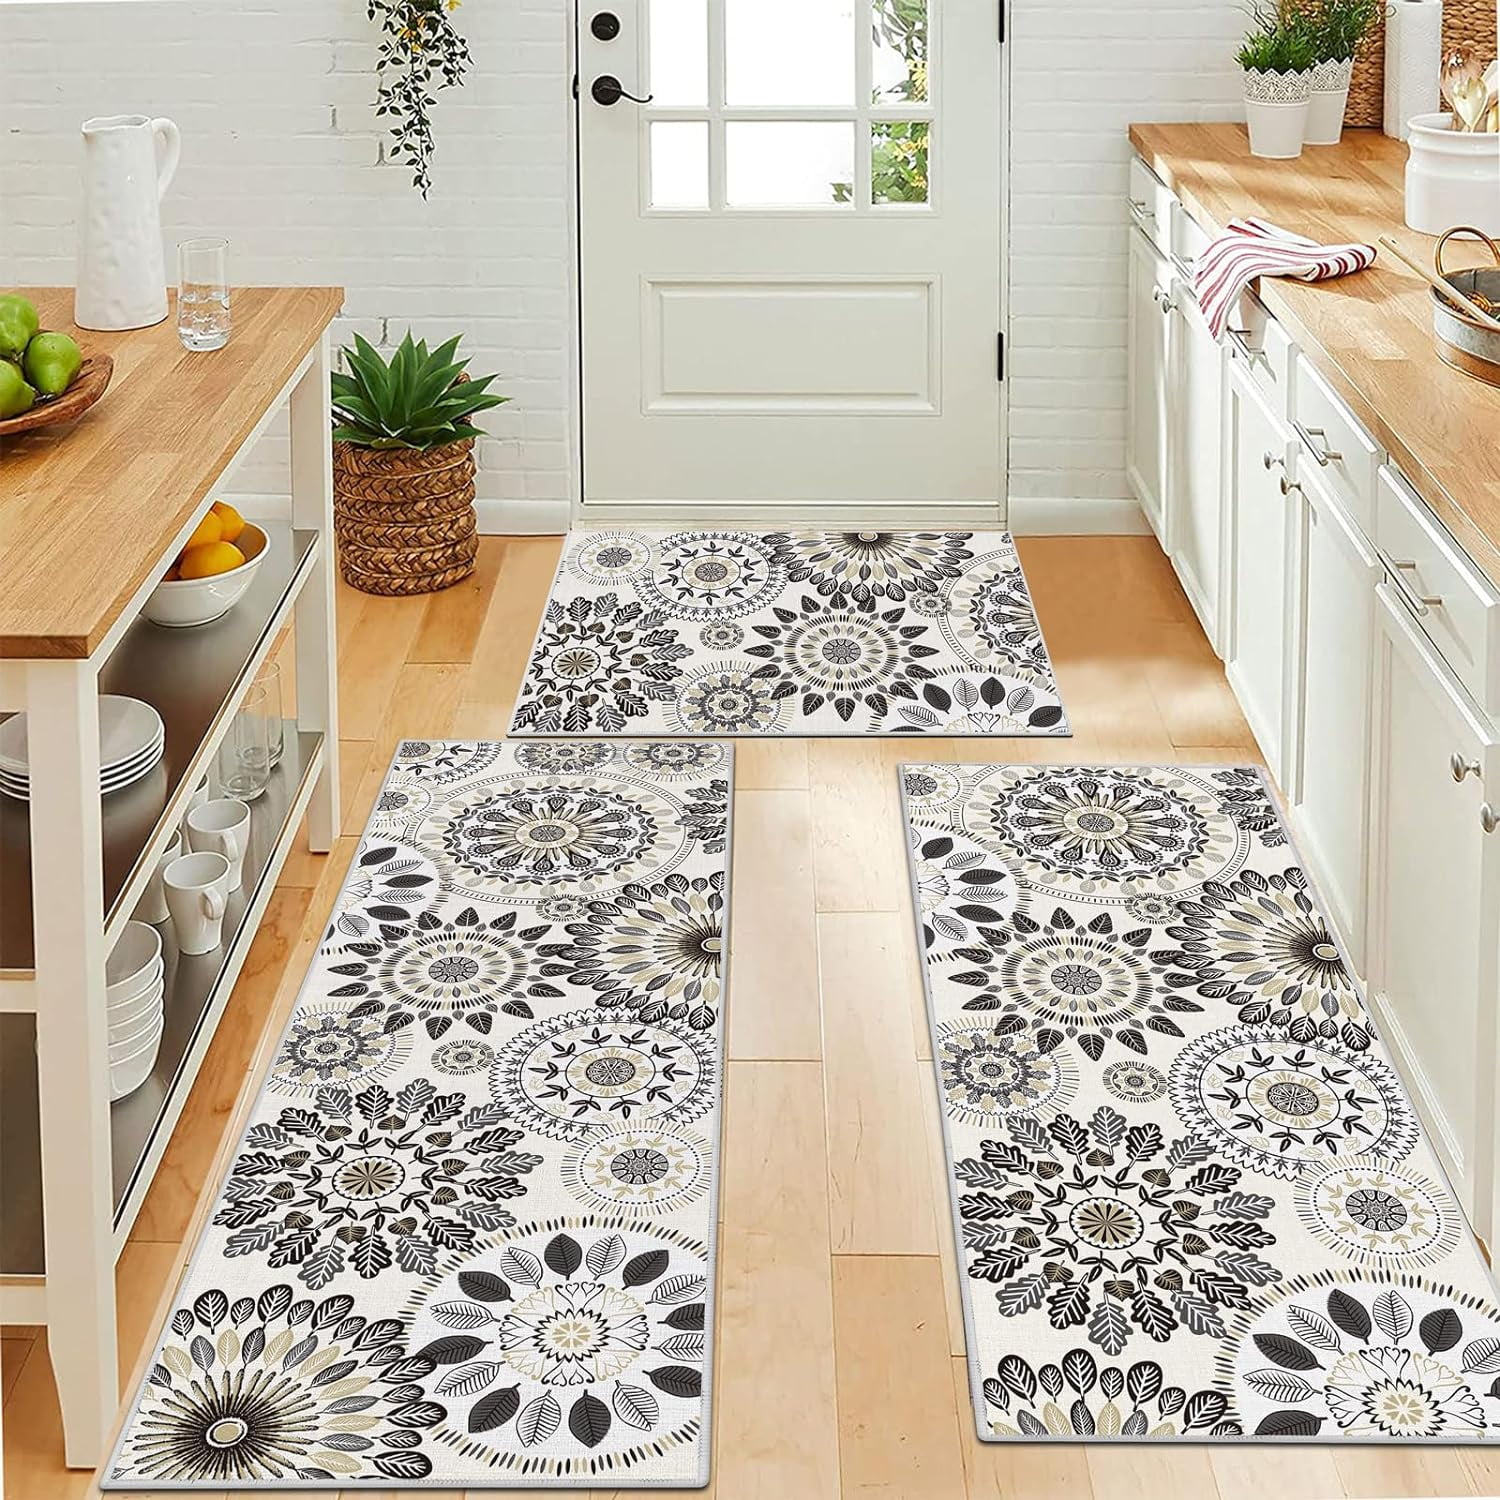 Tyrot Boho Kitchen Mat Set of 2 Cushioned Anti-Fatigue Floor Mat PVC Rubber  Kitchen Rugs Non Slip Waterproof Damask Floral Kitchen Rugs and Mats